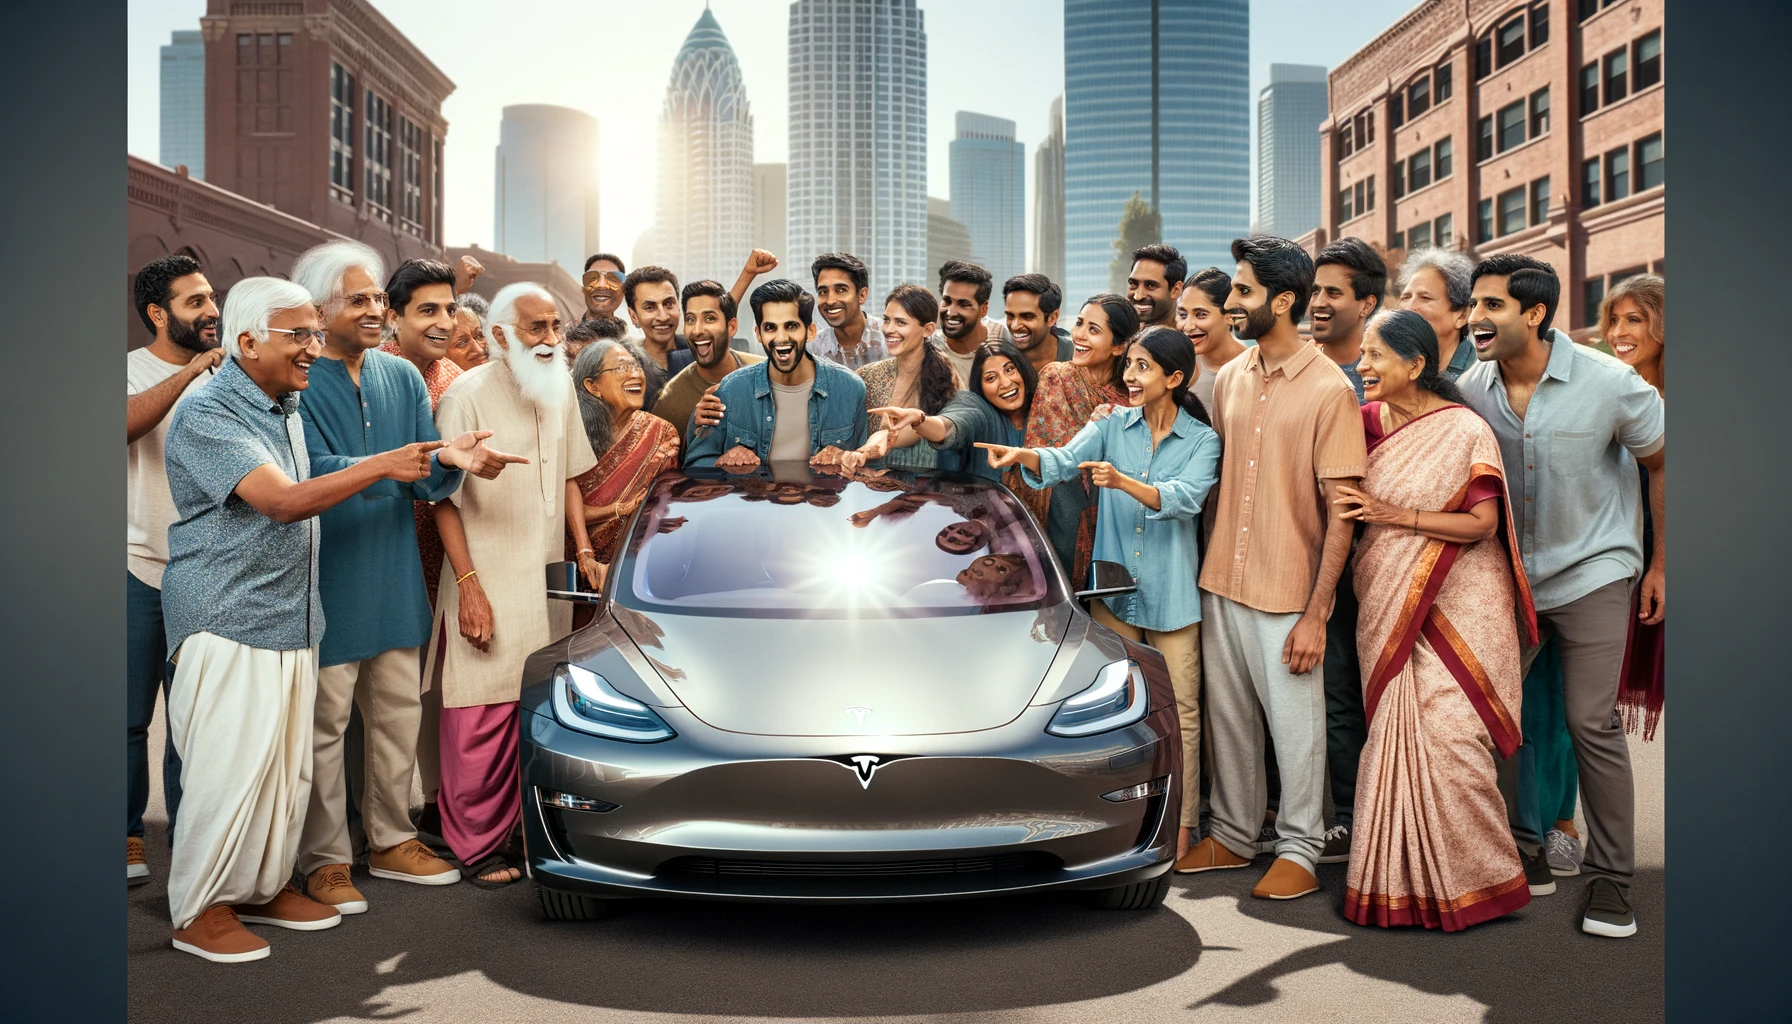 7 Reasons: Why Desi South Asians in the U.S. Are Fascinated by Tesla Cars